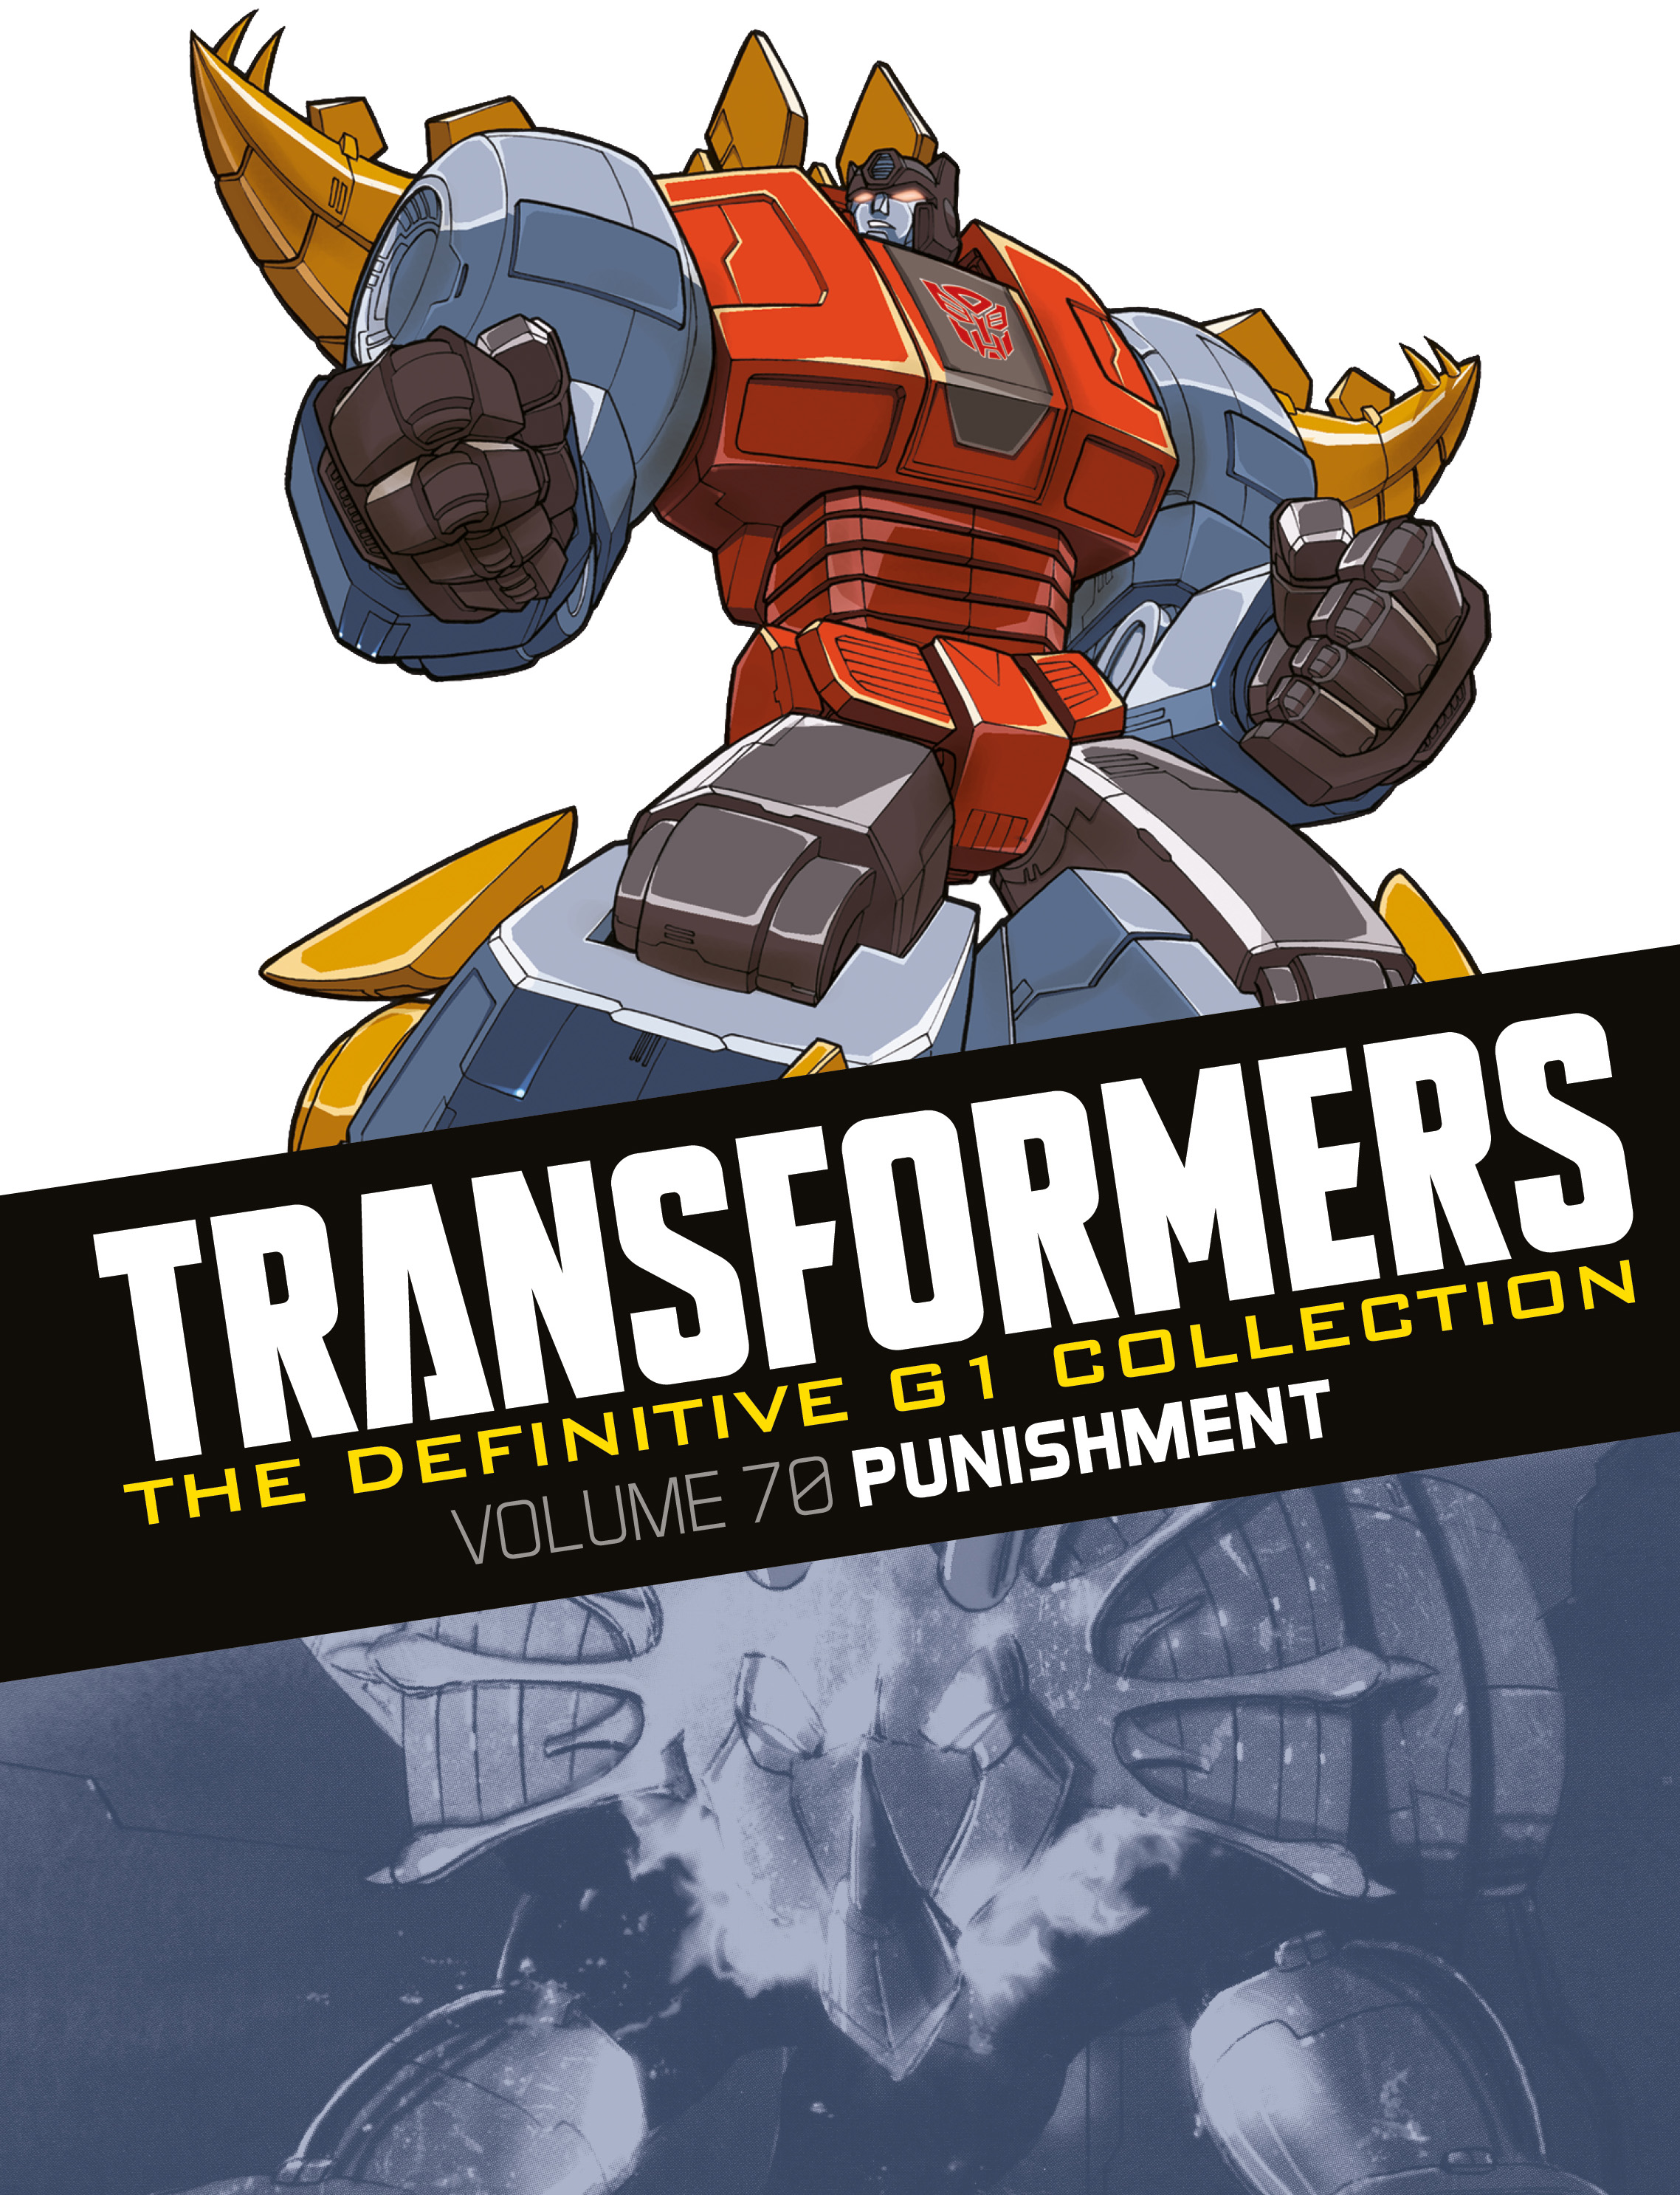 Transformers Definitive G1 Collection 